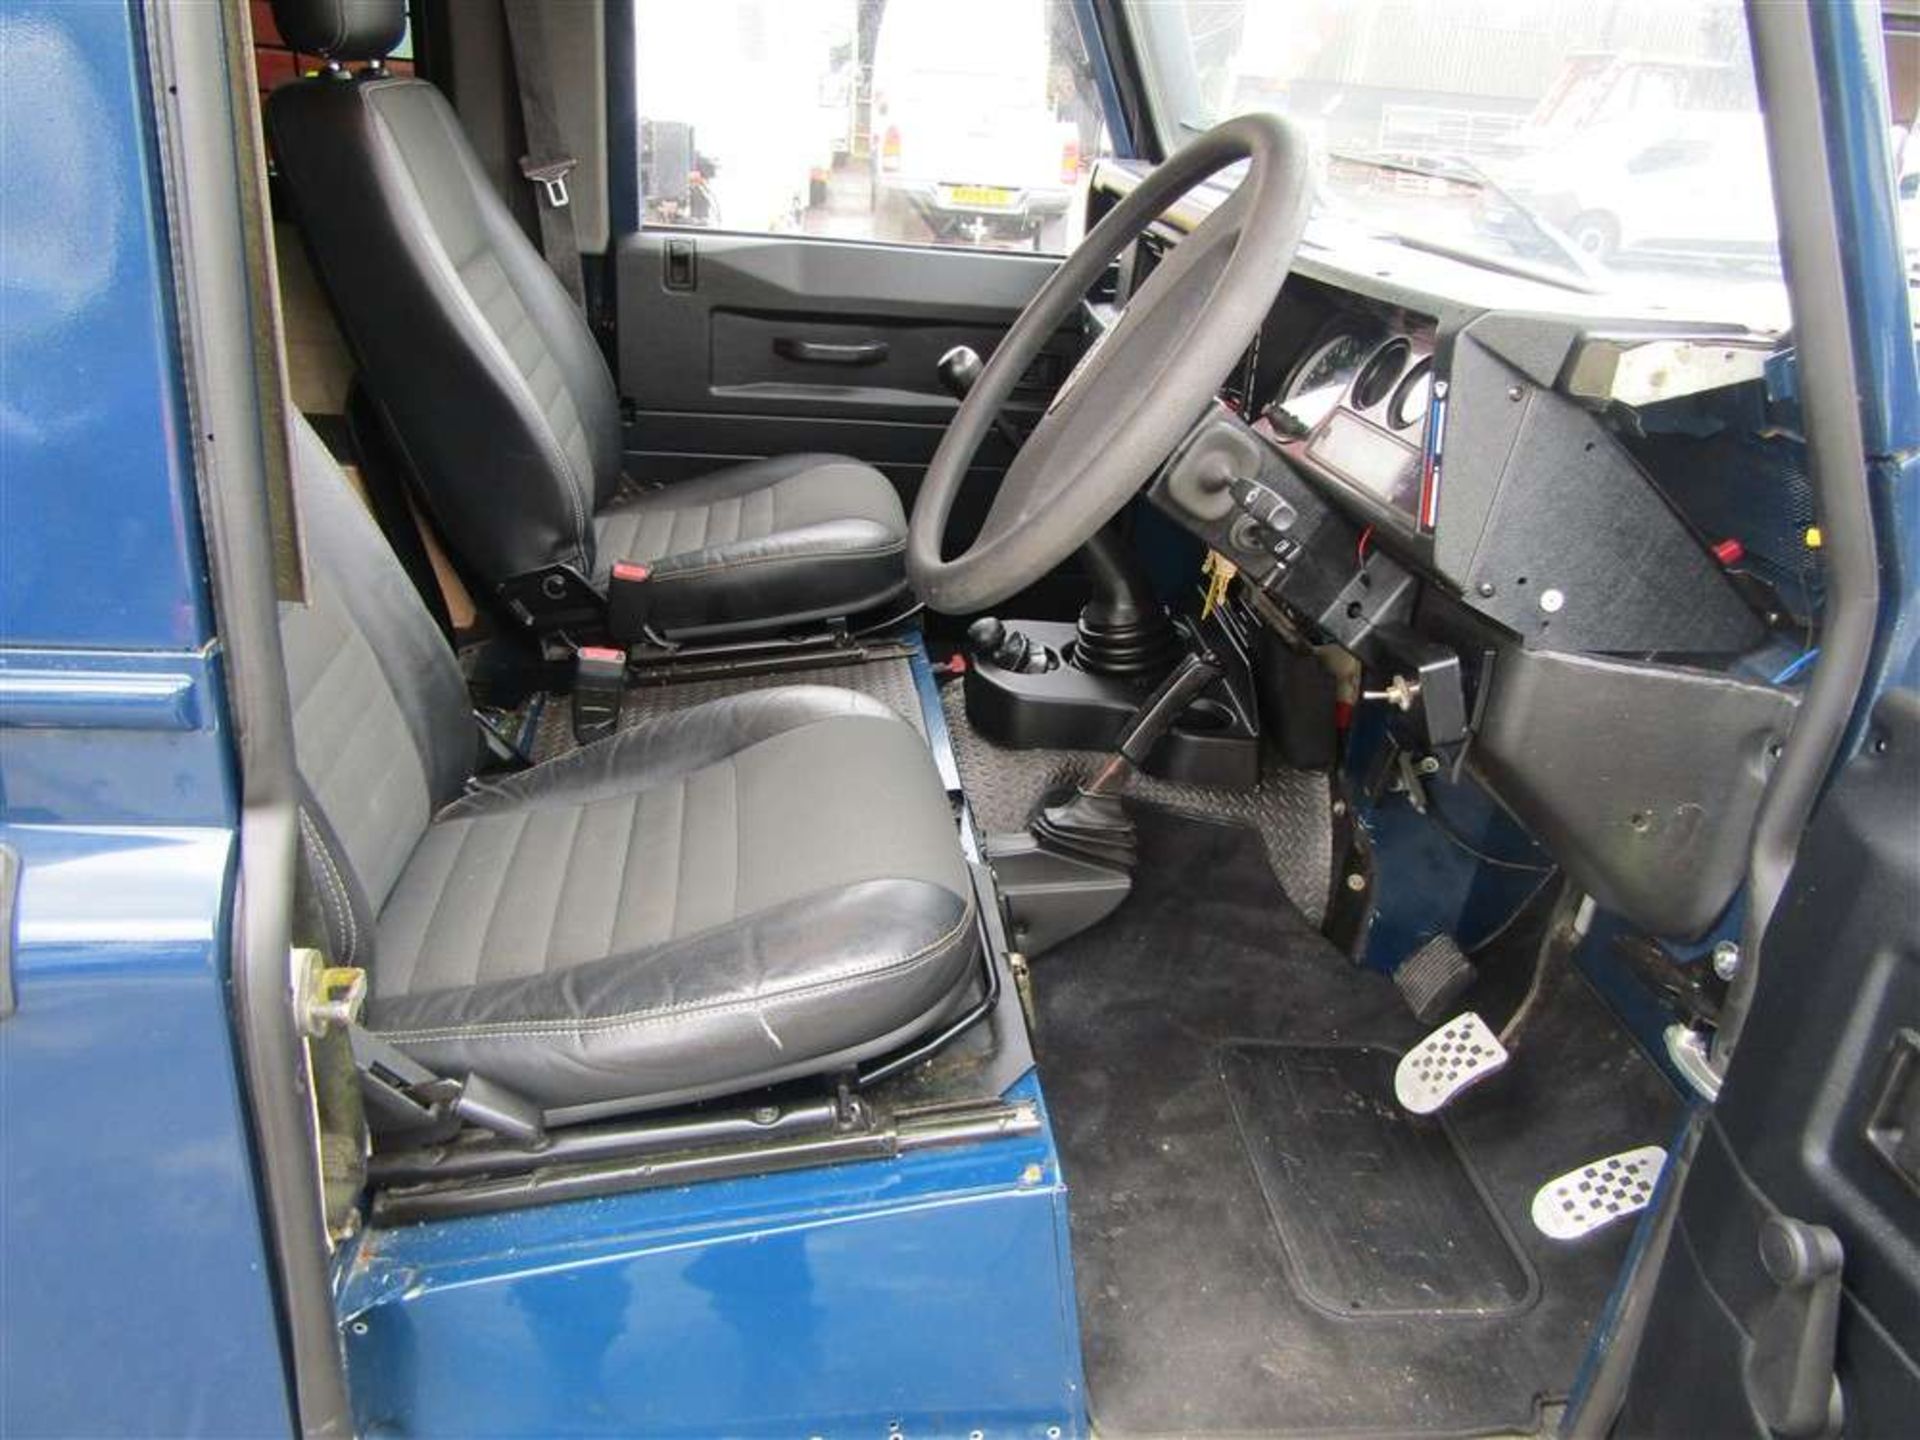 1990 G reg Land Rover 90 4C SW DT - SEE ADDITIONAL INFO FOR A LIST OF EXTRAS ON THIS VEHICLE !!! - Image 5 of 6